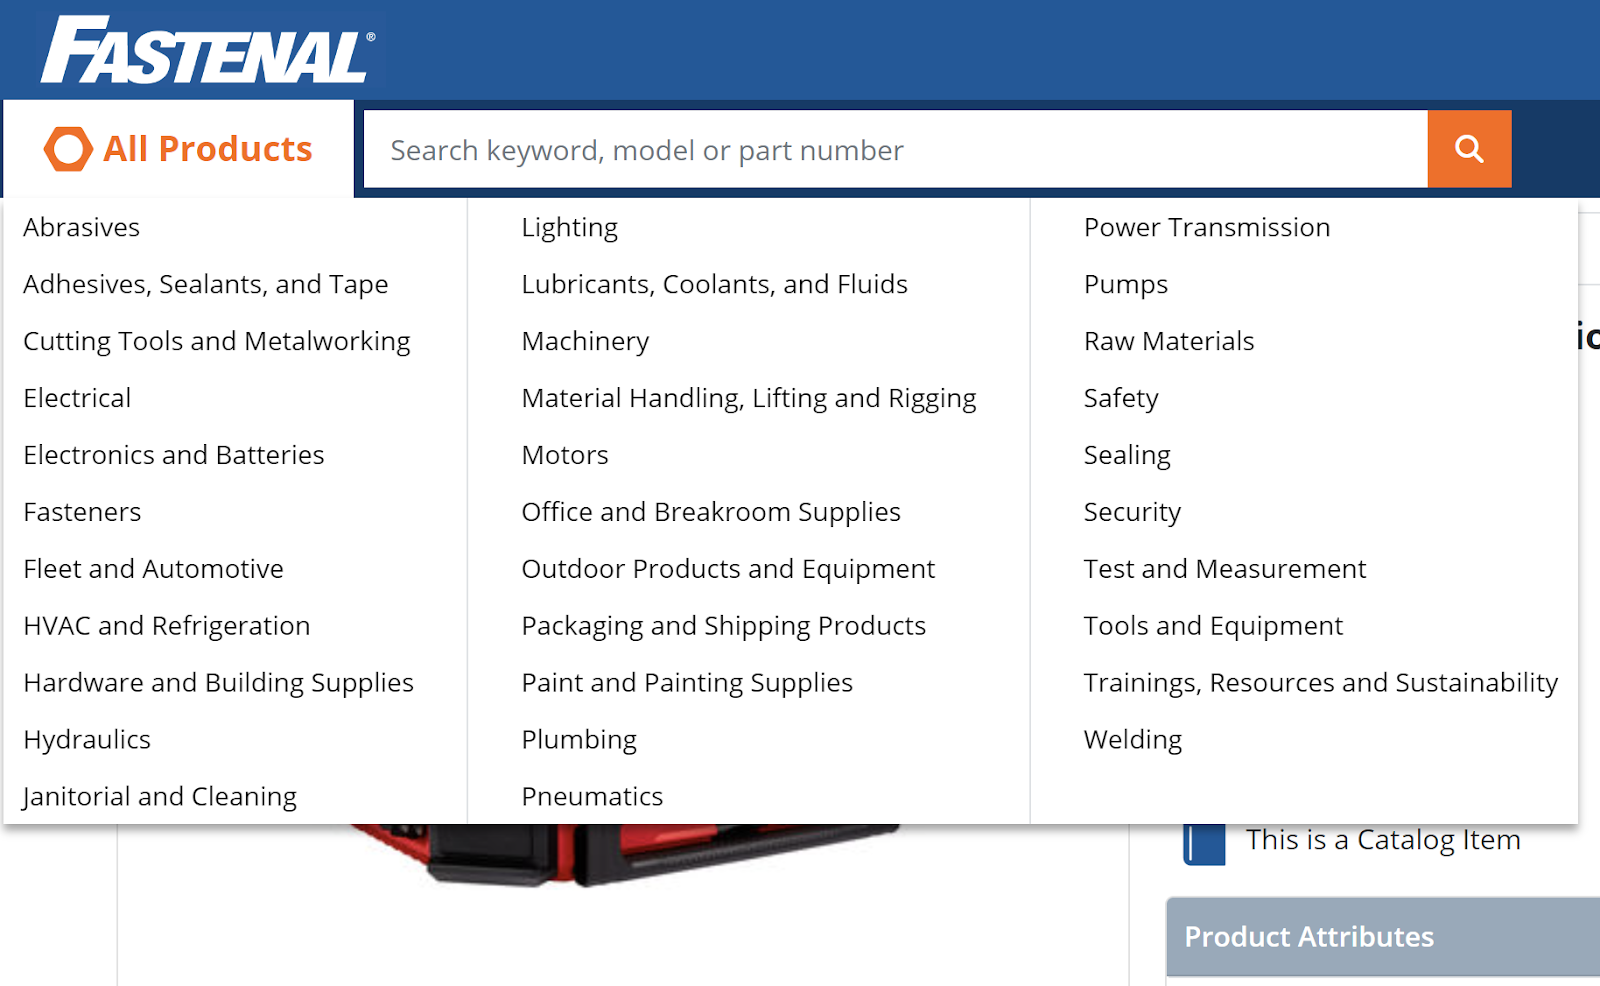 All products drop-down paper   connected  Fastenal's website